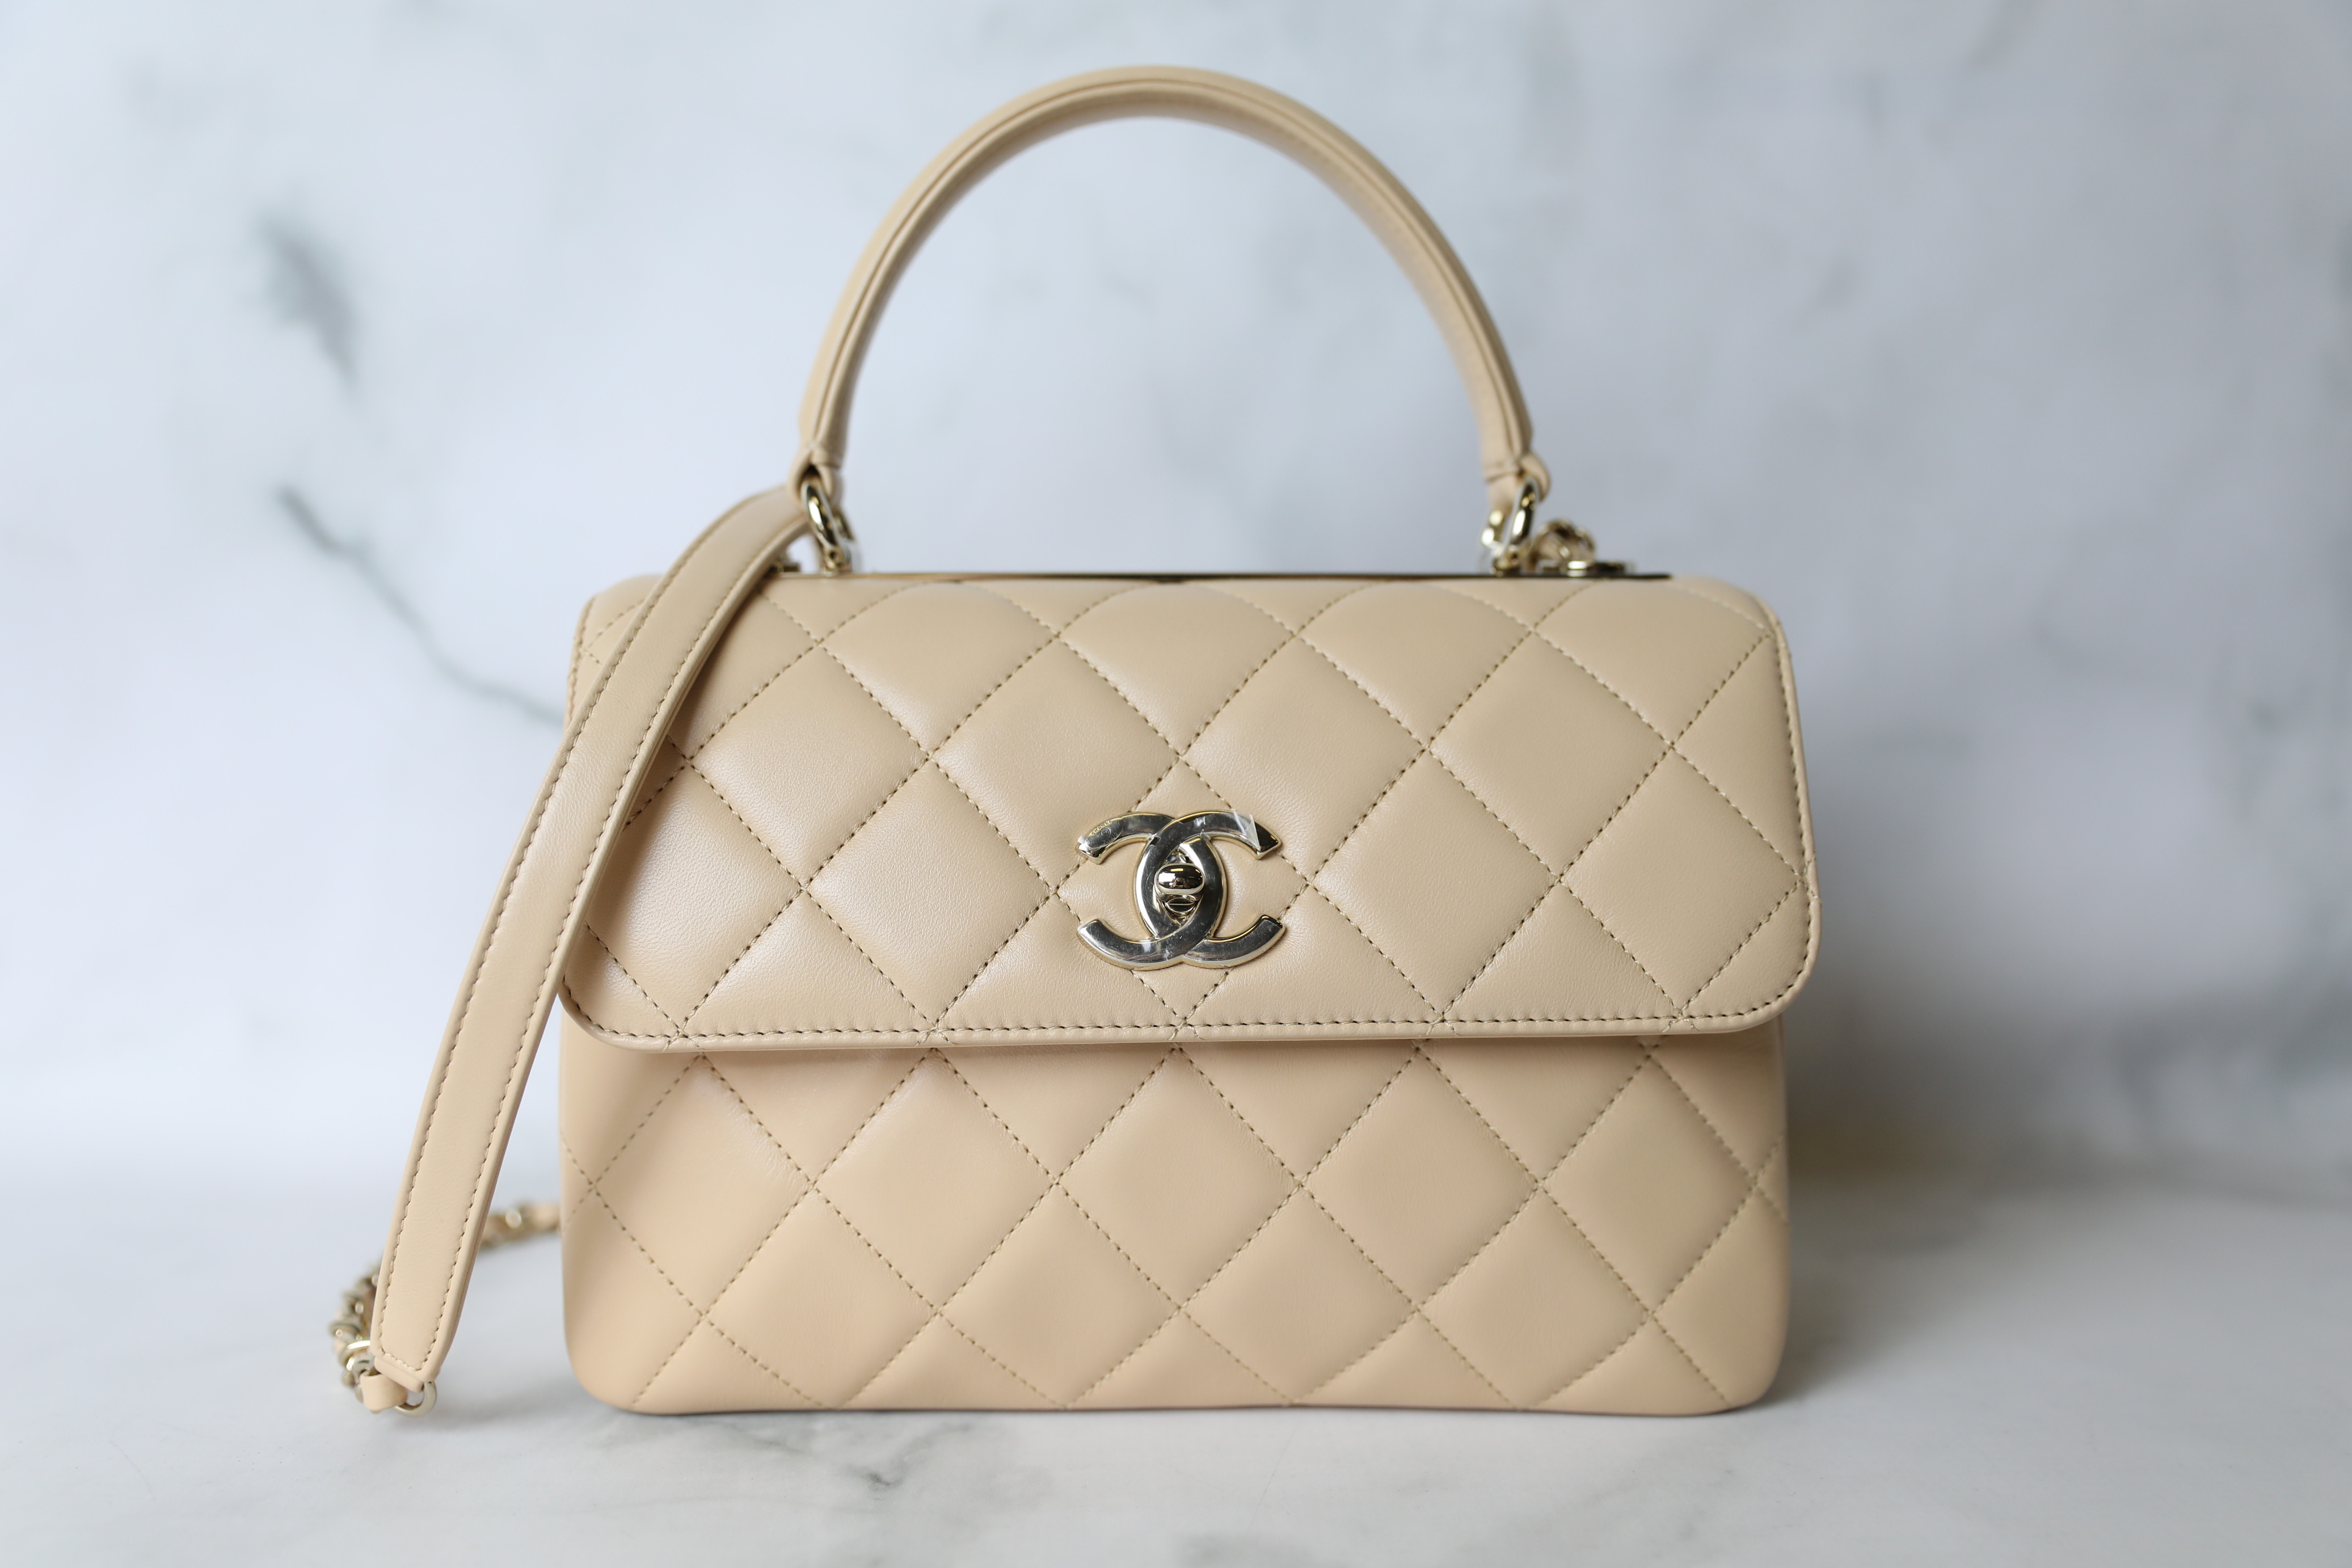 Chanel Medium Diana Flap, Distressed Patent Leather, Beige GHW